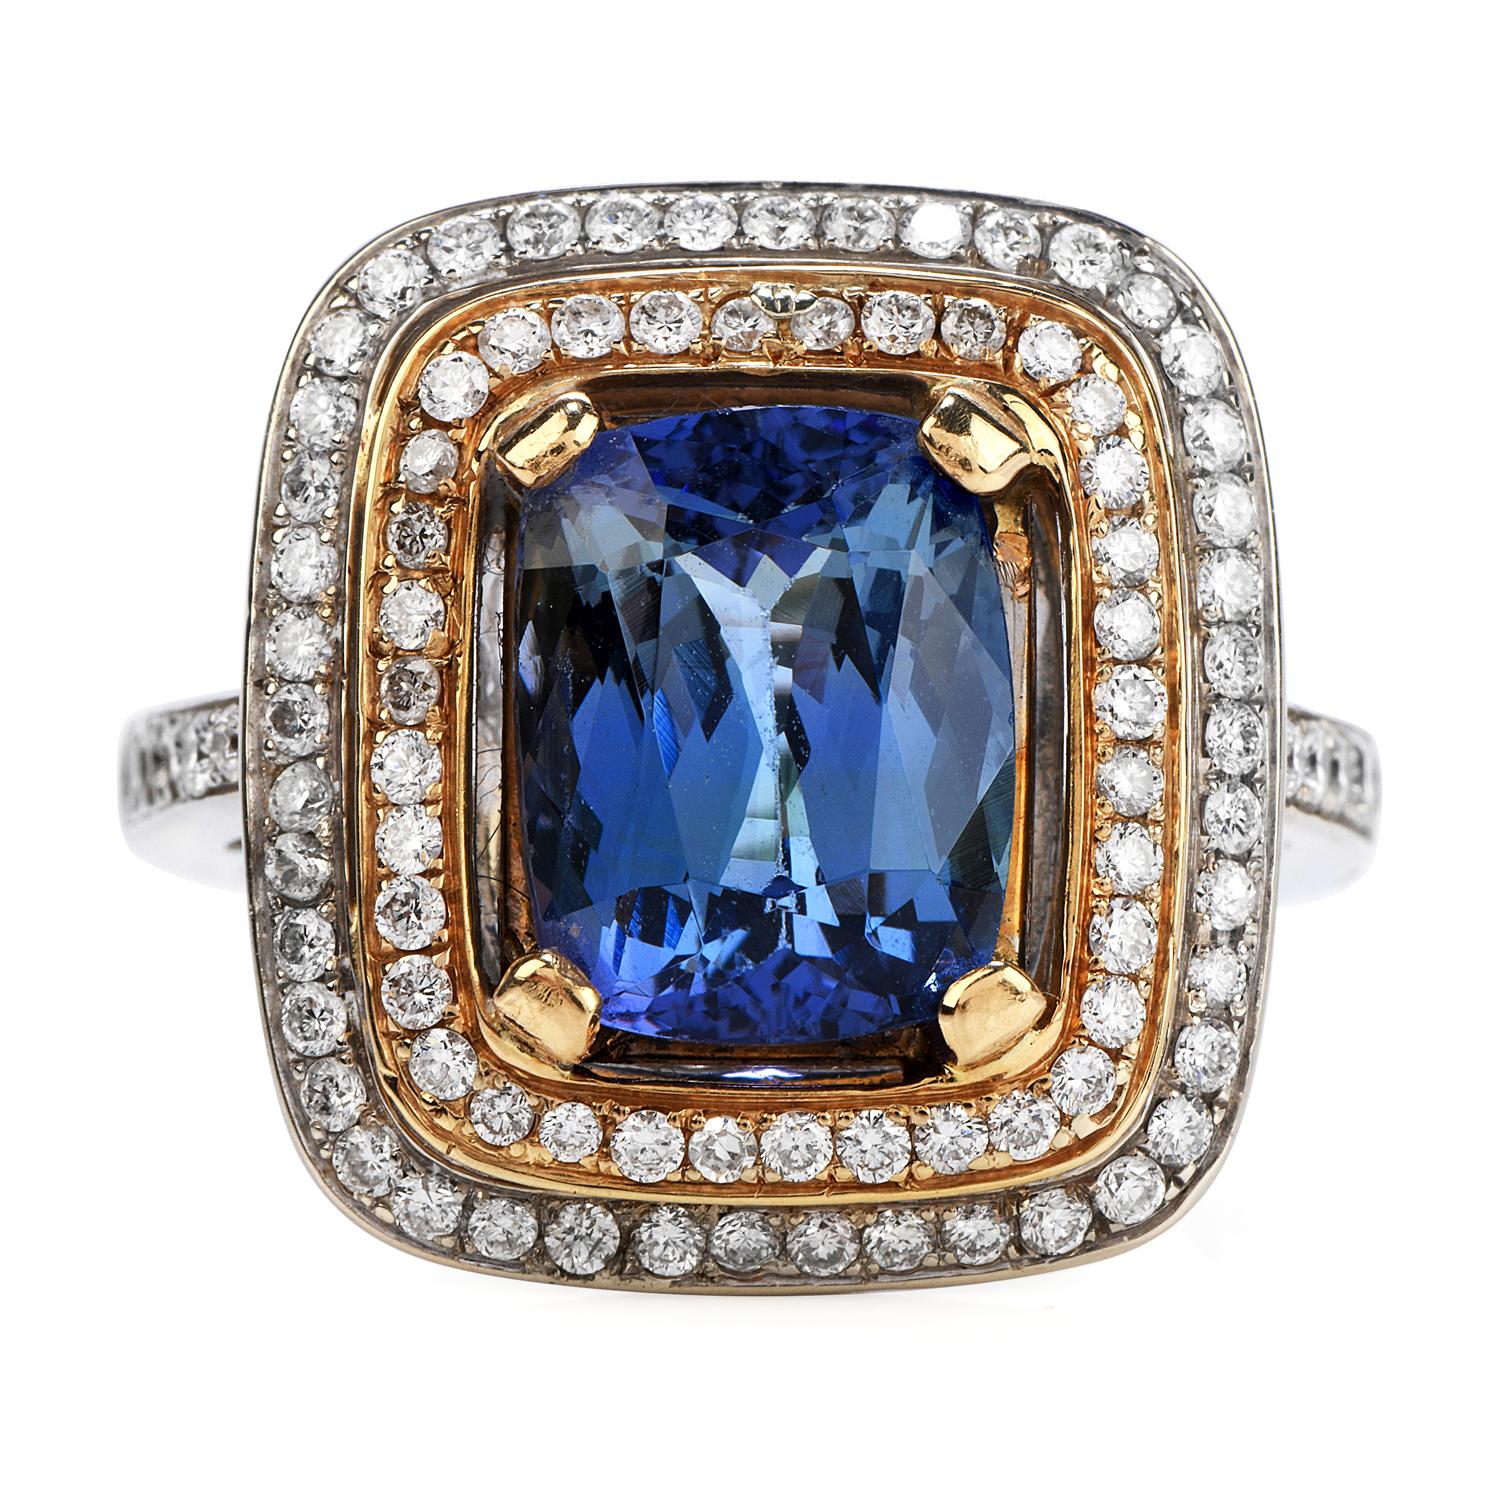 Estate Tiffany & Co. Cocktail & Engagement Cocktail  Ring, with a center GIA certified Tanzanite.

Crafted in solid heavy 18K White Gold & Yellow Gold accents, the center is adorned by a GIA certified Tanzanite of approximately 4.41 carats. 

The